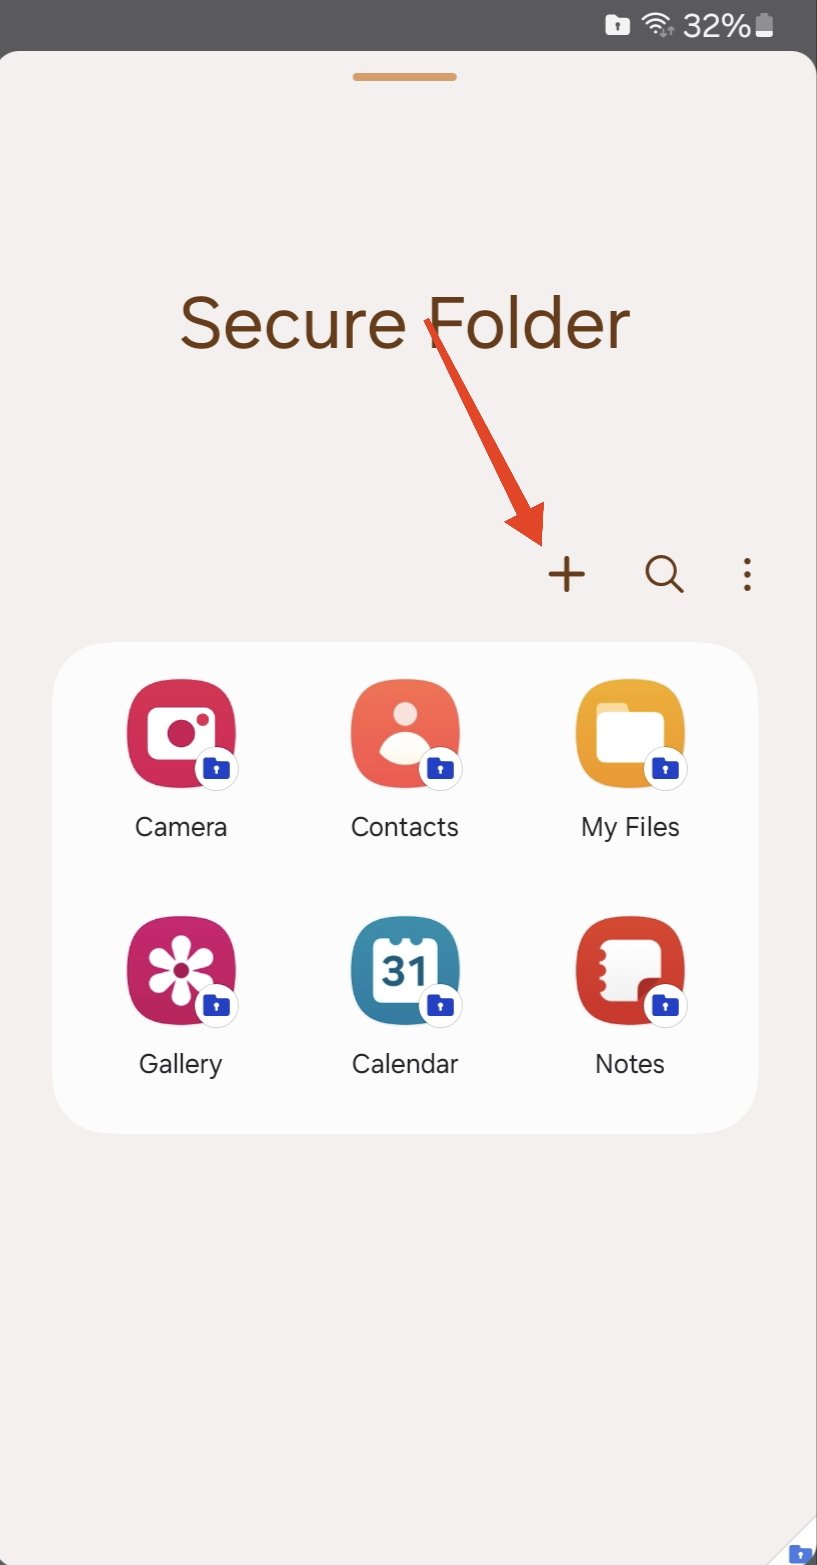 add an app to the secure folder